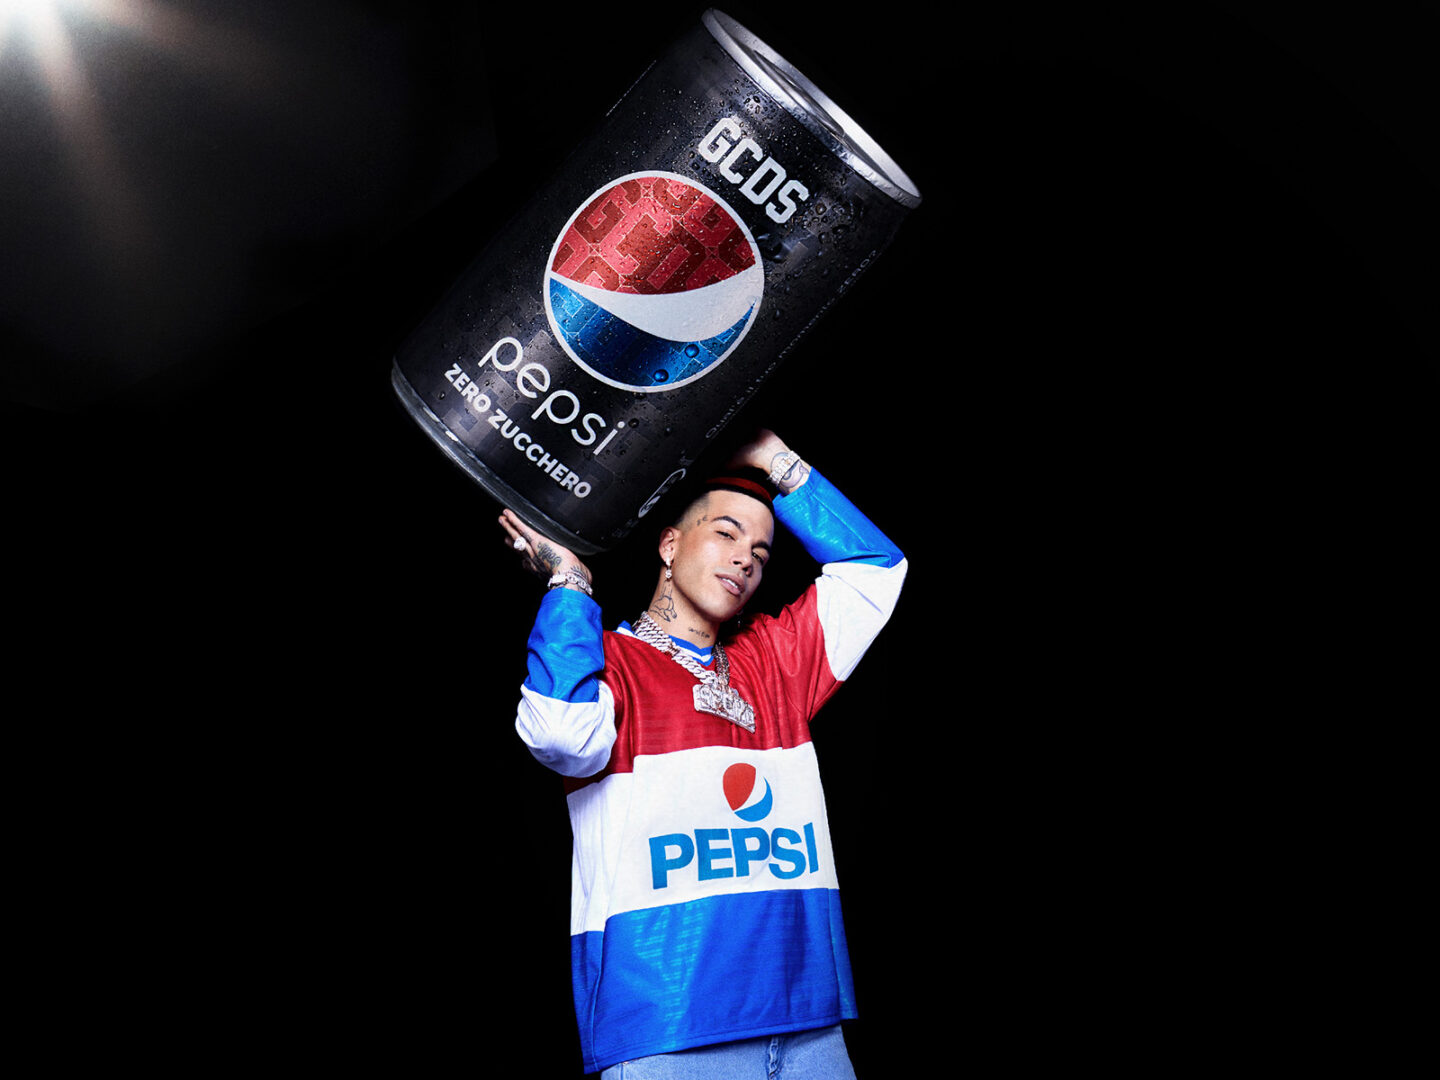 GCDS & PEPSI: an unexpected collaboration for the launch of Pepsi Zero in Italy